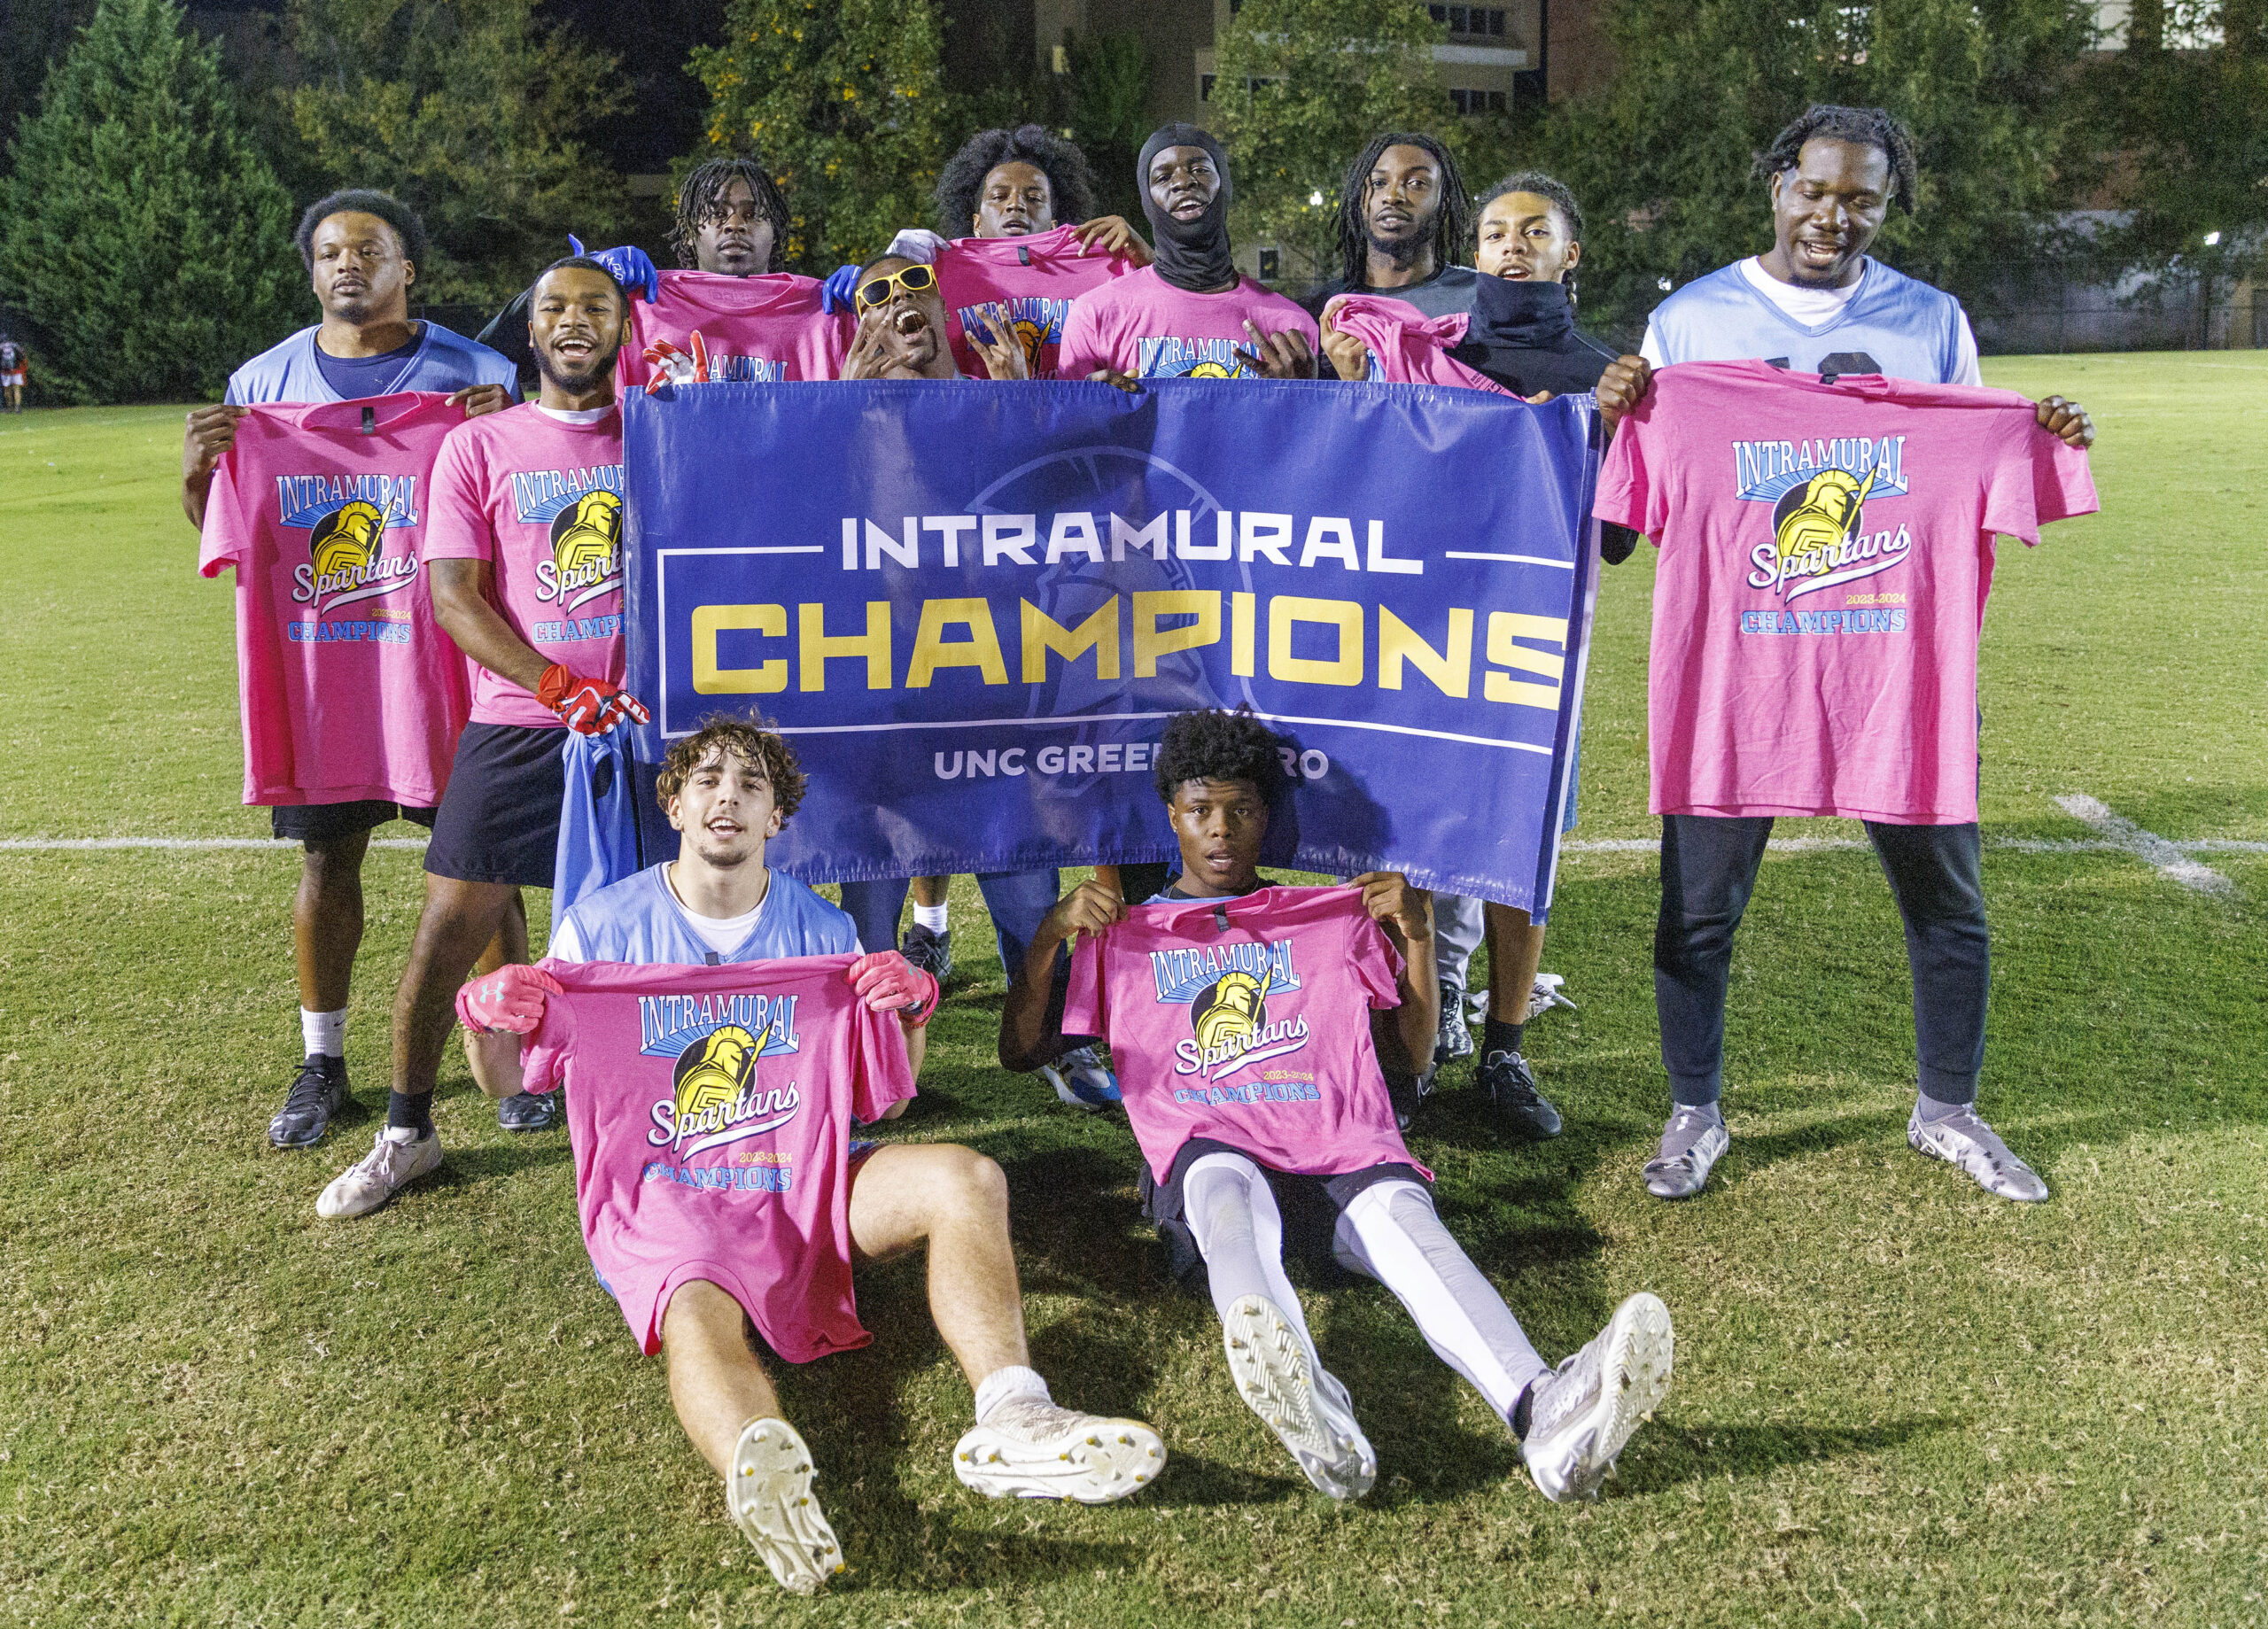 The championship flag football team poses holding pink tshirts and "intramural champions" flag.